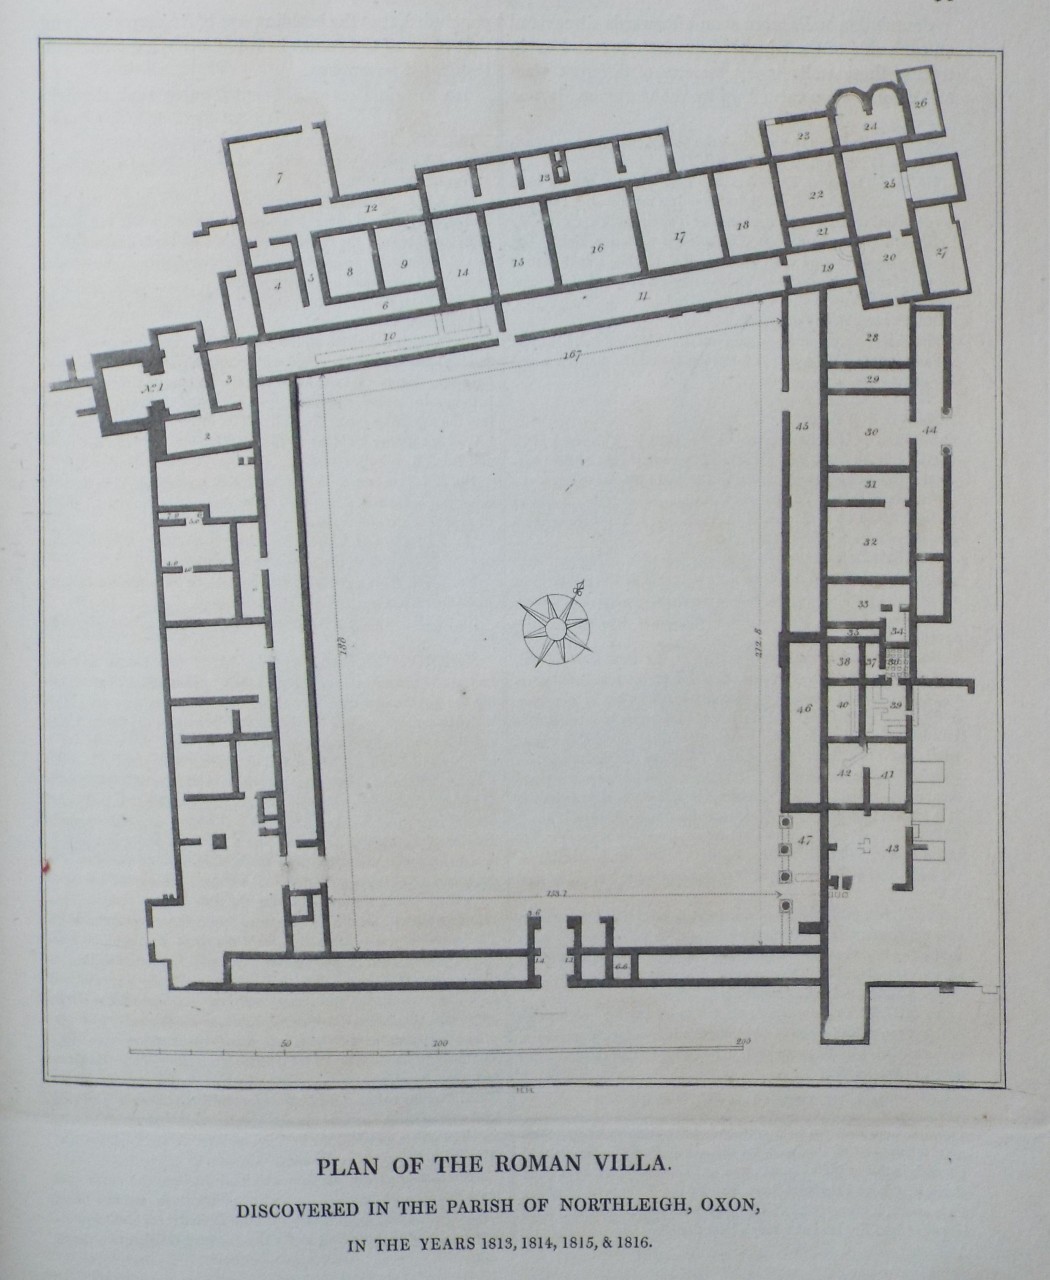 Print - Plan of the Roman Villa discovered in the Parish of Northleigh, Oxon, in the years 1813, 1814, 1815 & 1816. - Skelton